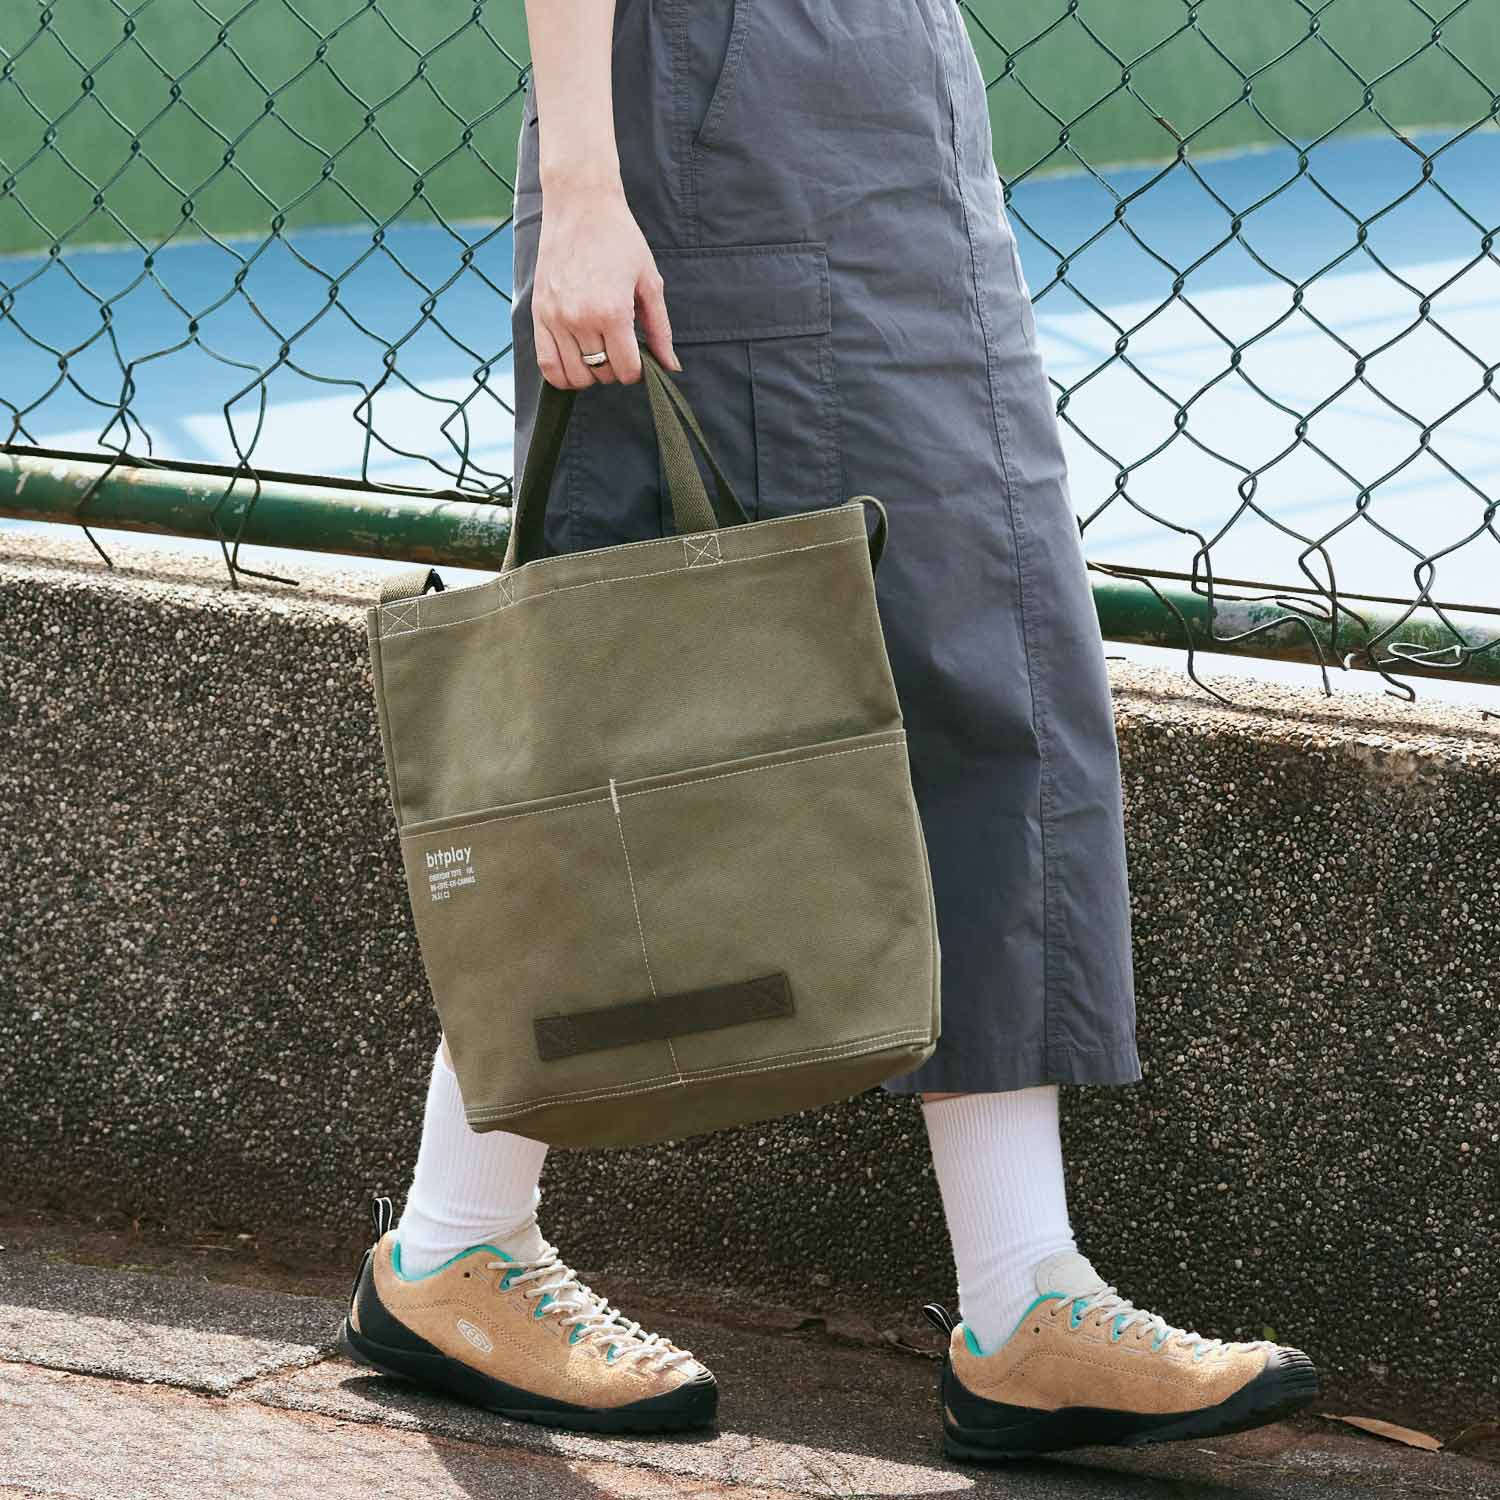 Everyday Canvas Tote 10L - Army Green